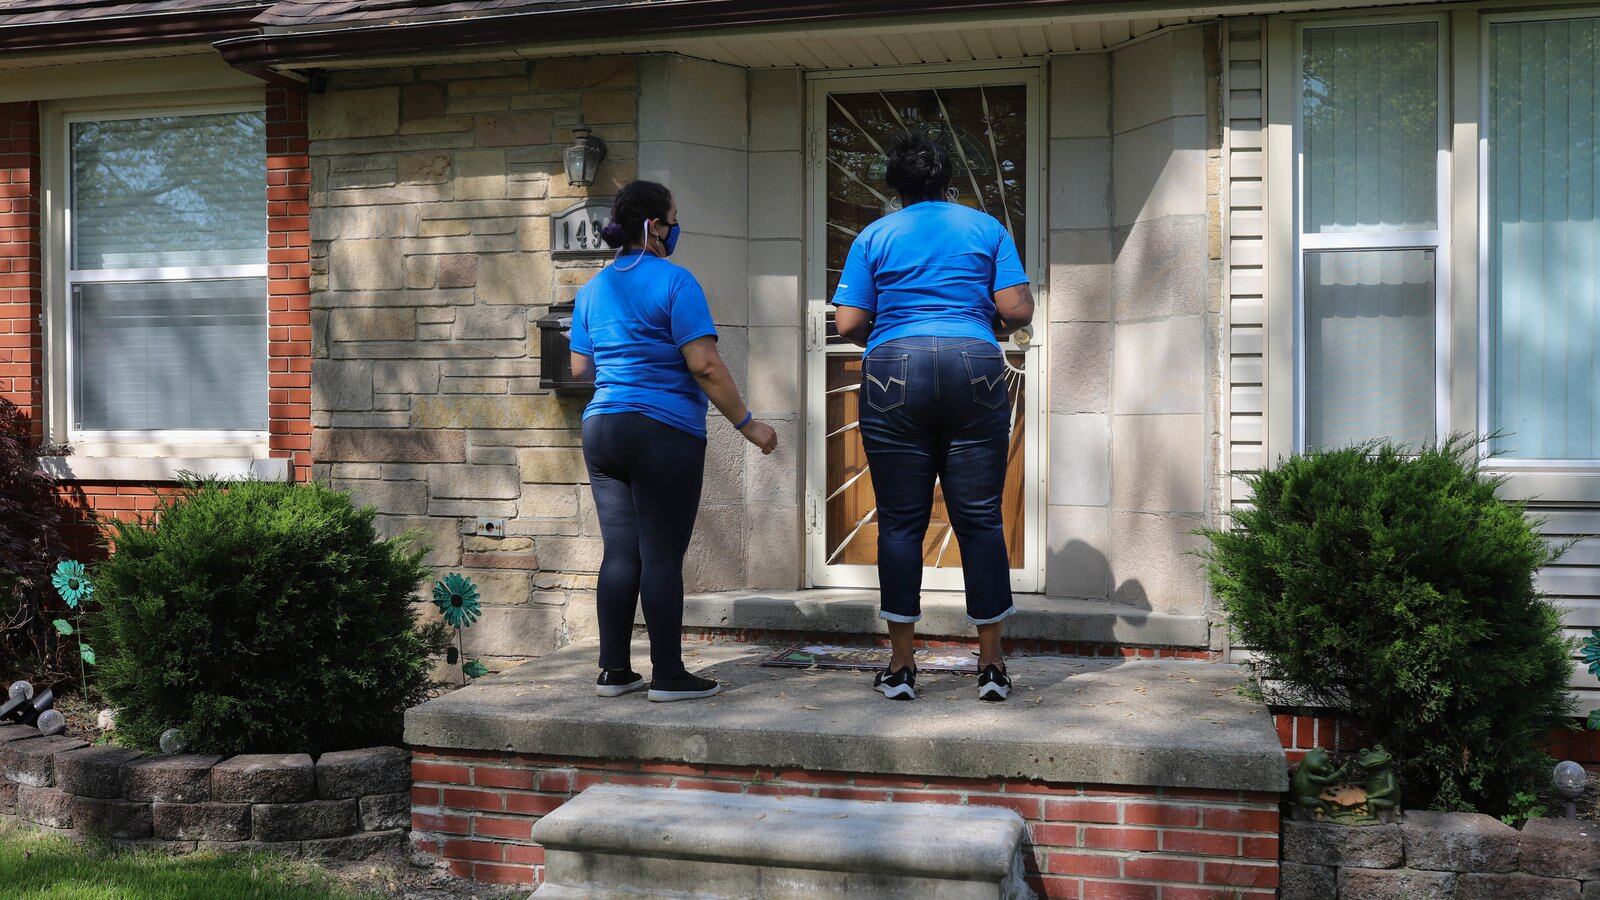 Two women, wearing blue shirts and jeans, stand at the front door of a house in Detroit, Mich. that is patterned from the sun and shadows.